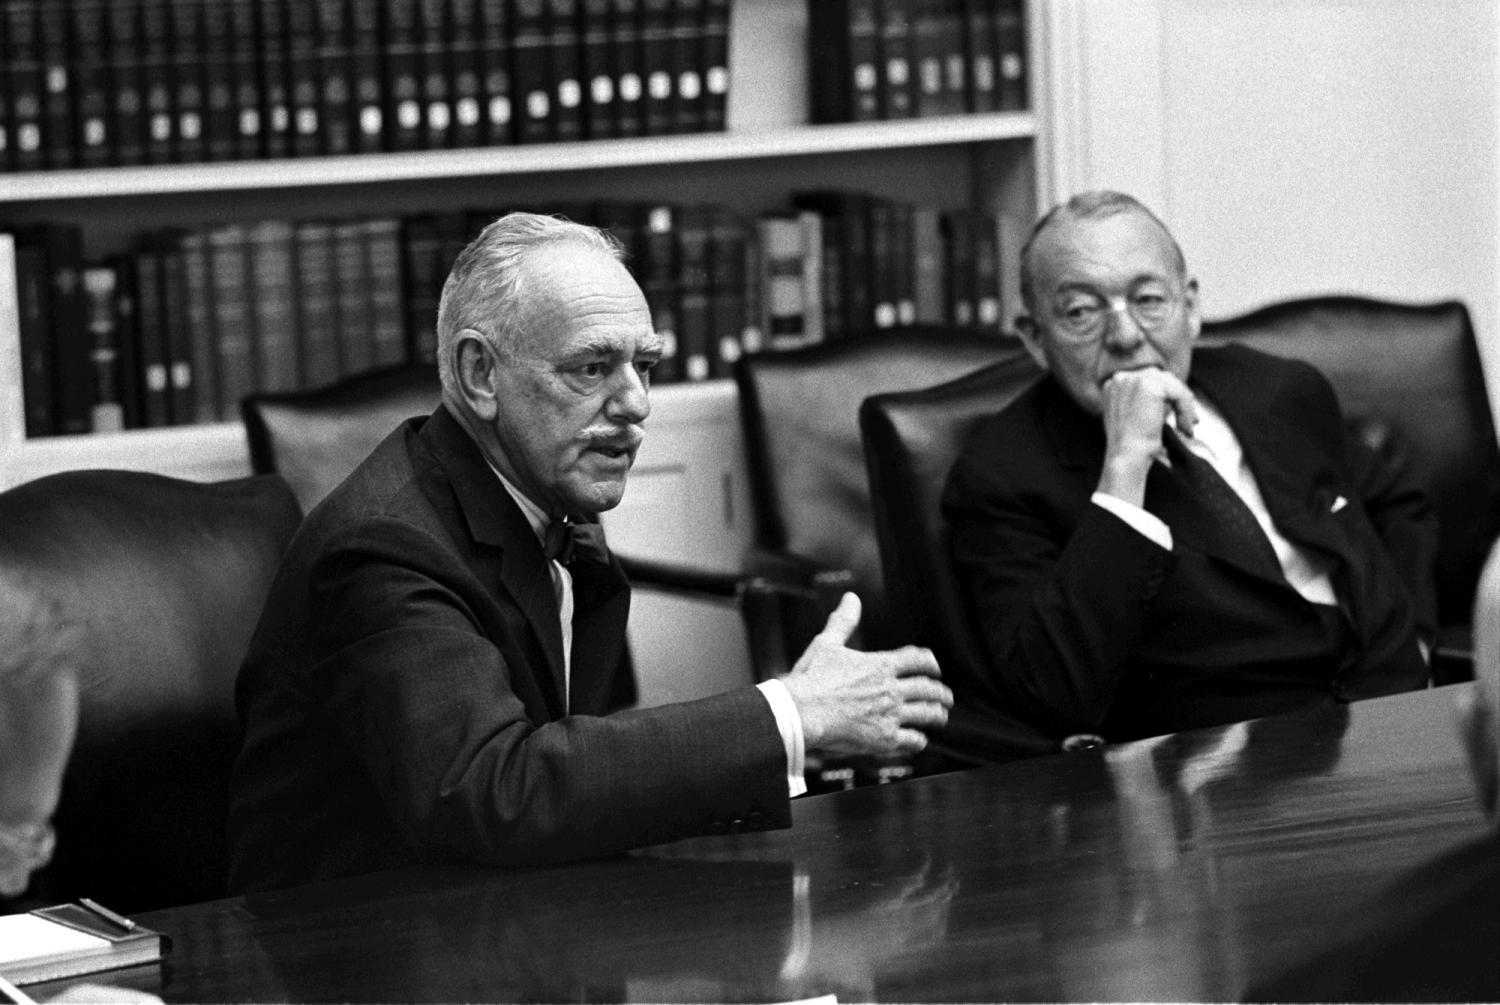 Dean Acheson (L) at Meeting of President's consultants on Foreign Affairs (The Wise Men) | LBJ Presidential Library